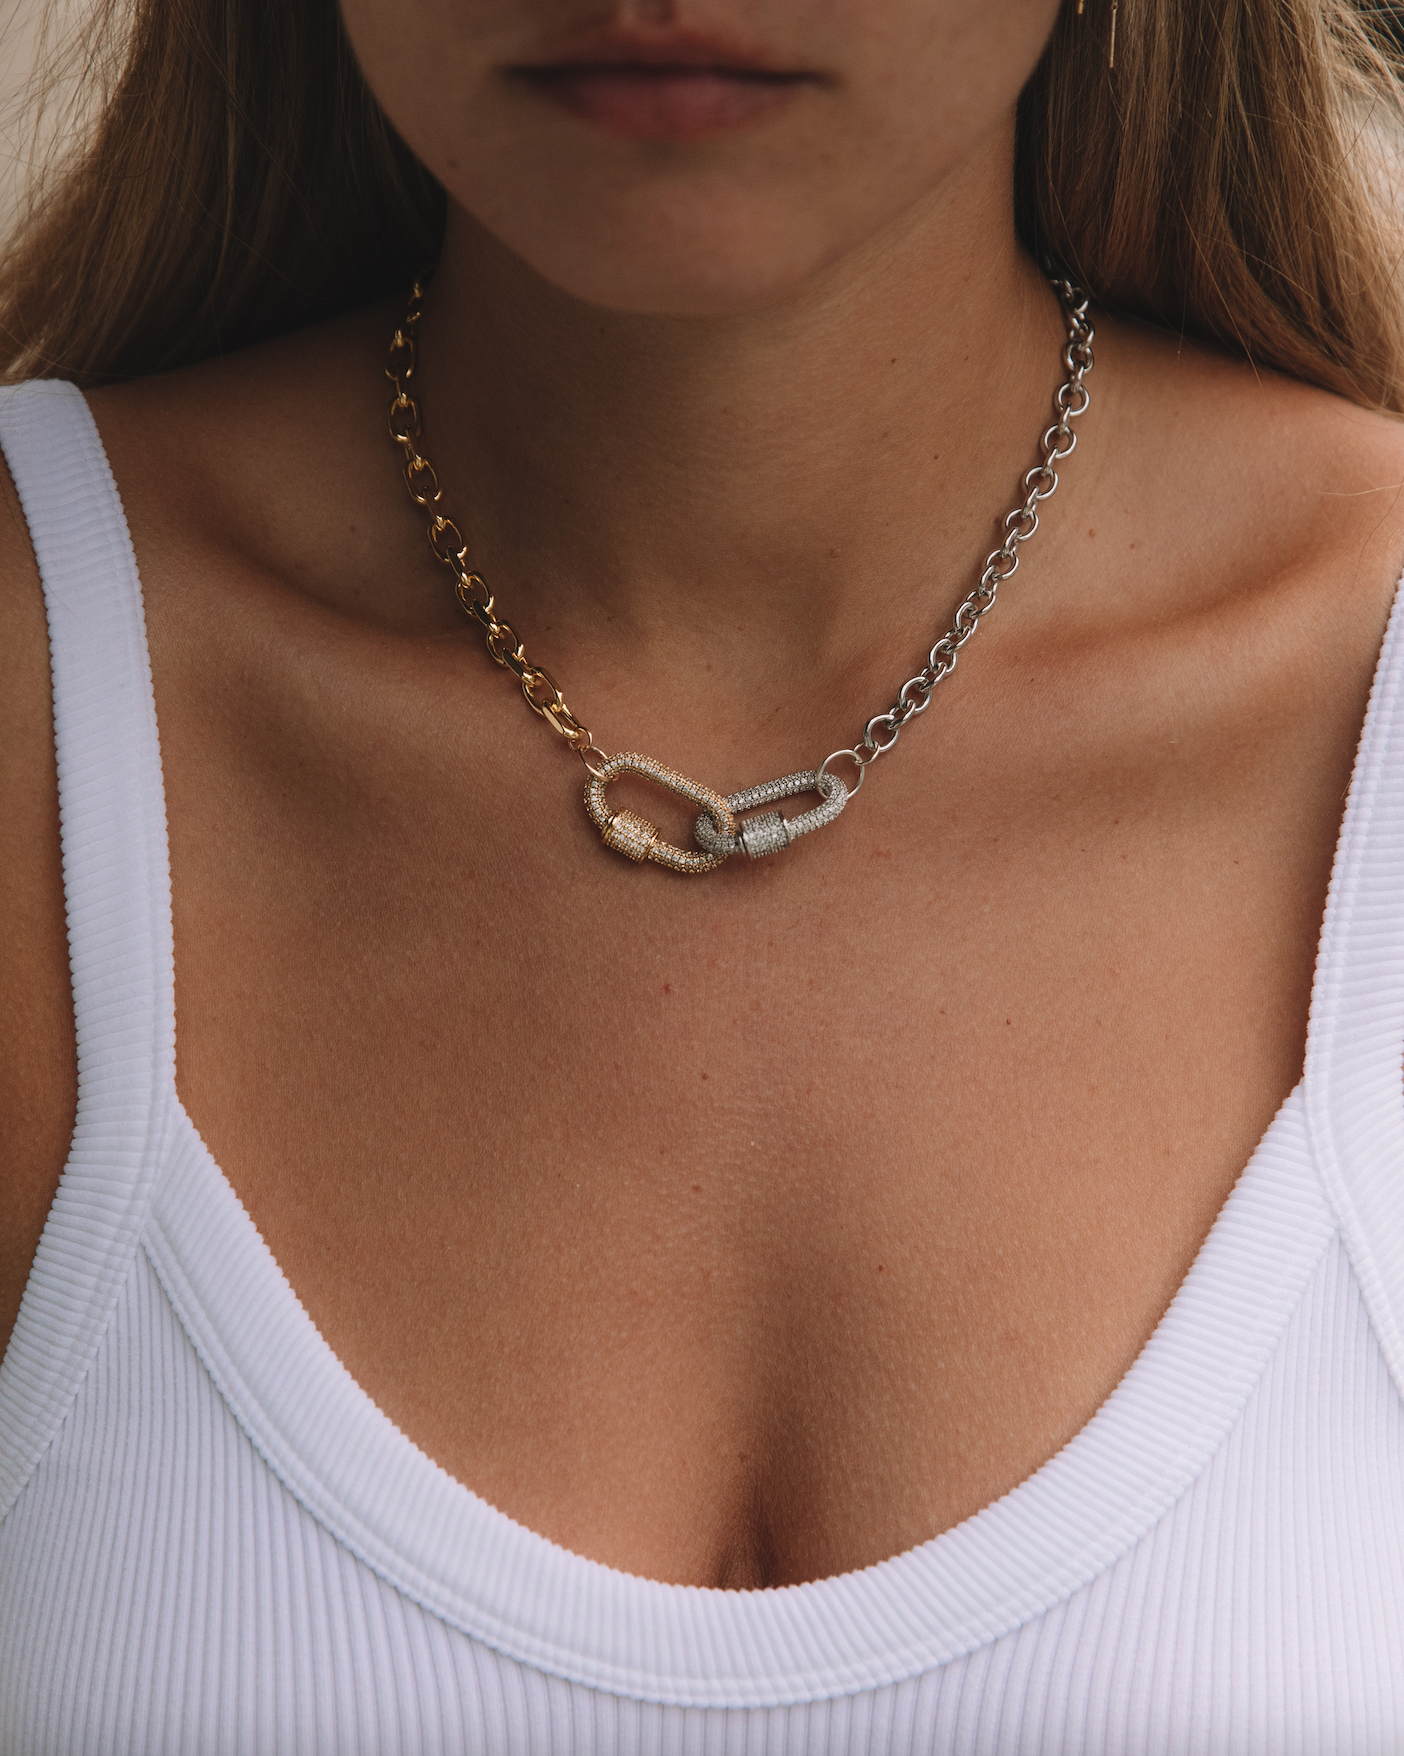 The 2 Tone CZ Carabiner Necklace